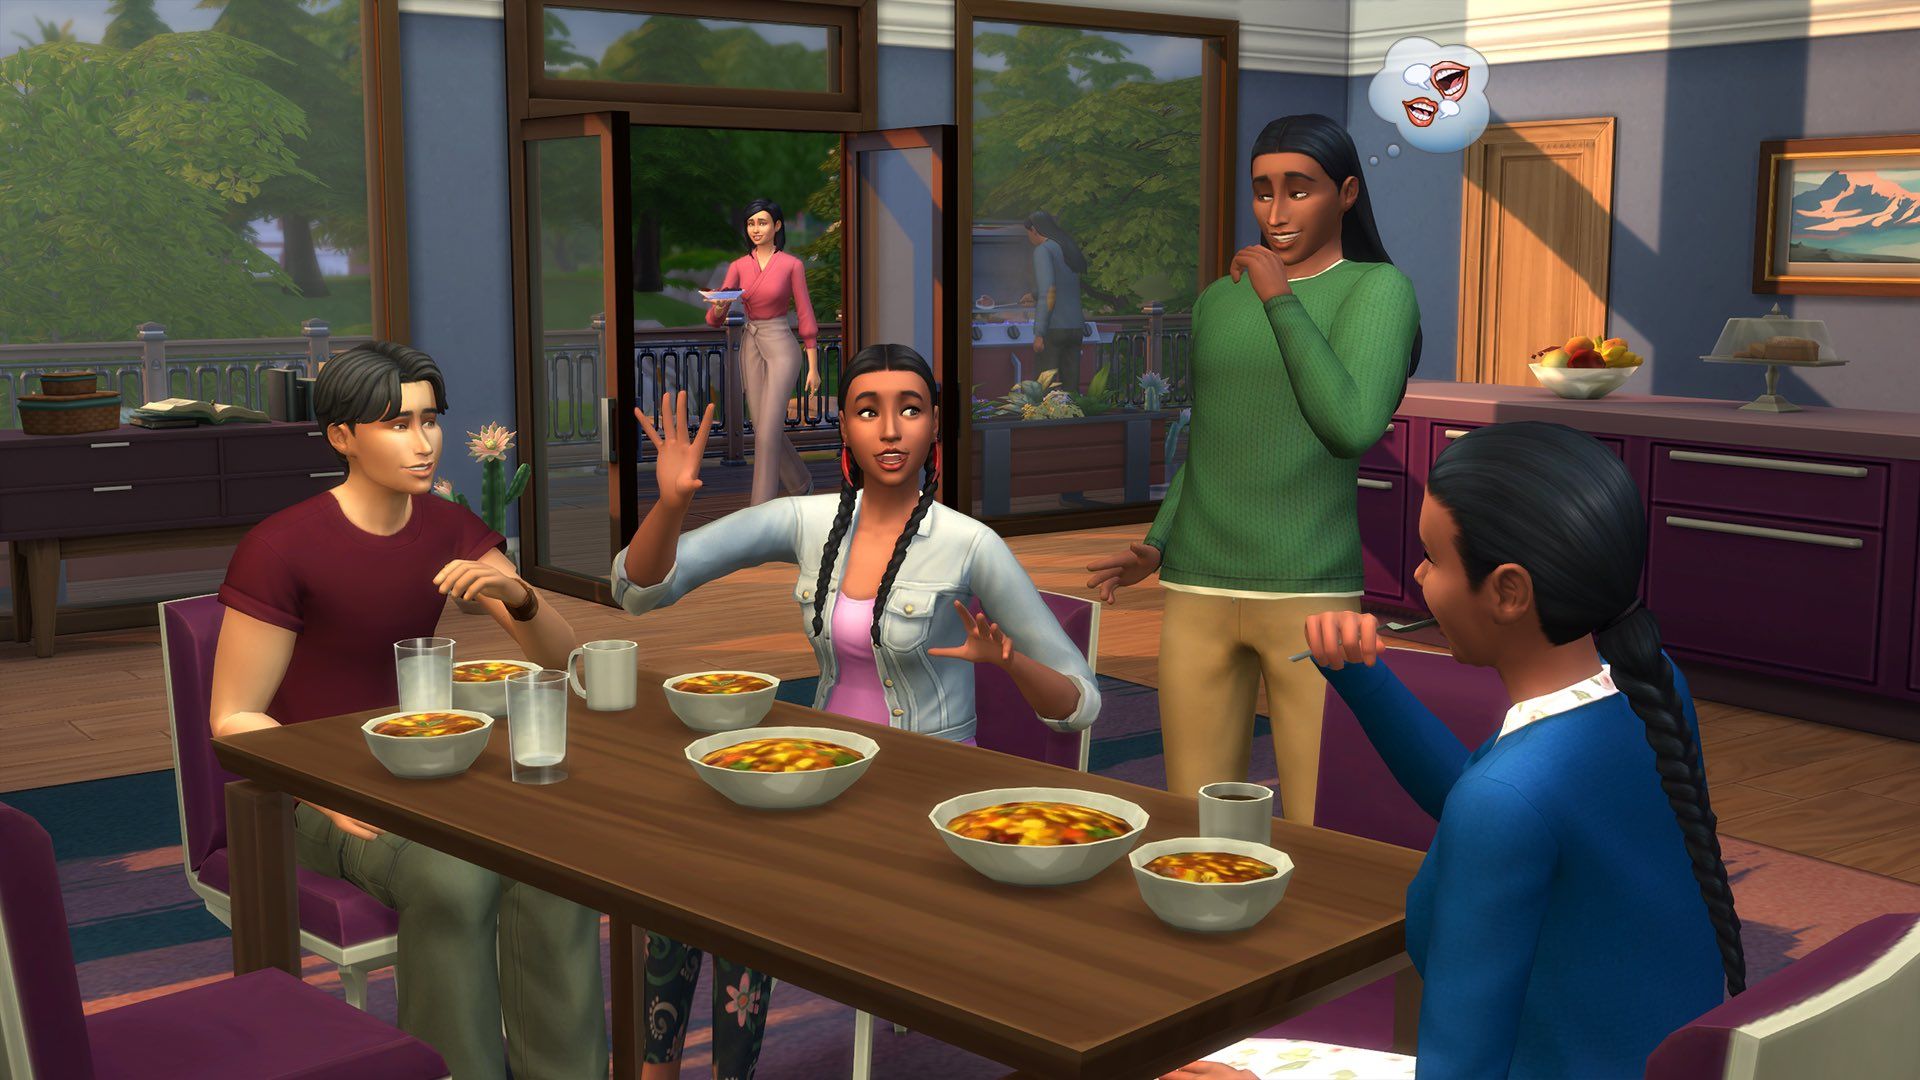 The Sims 4 Base Game Available FREE for a Limited Time (PC/Mac)